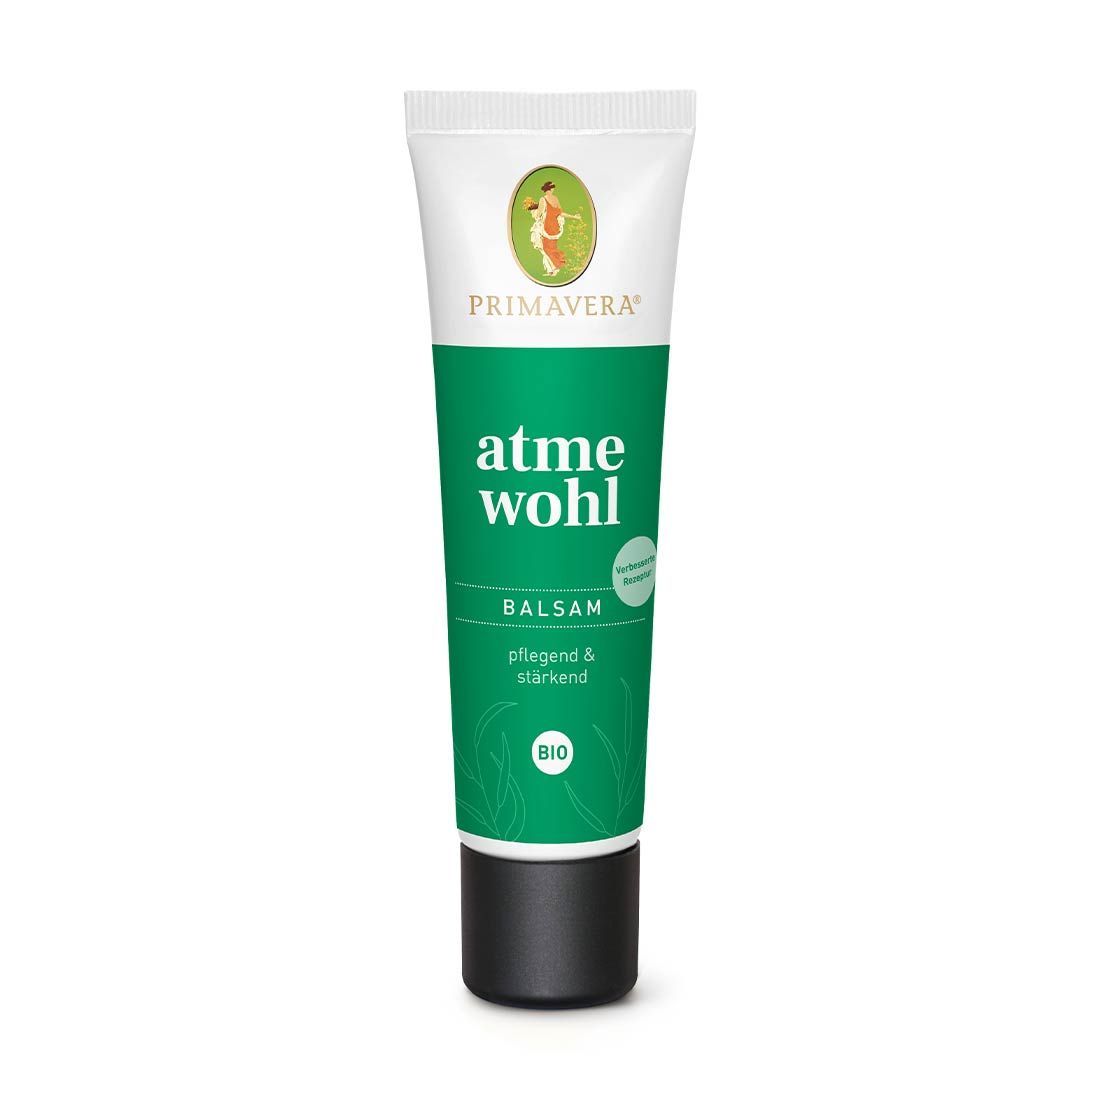 Atme wohl Balsam